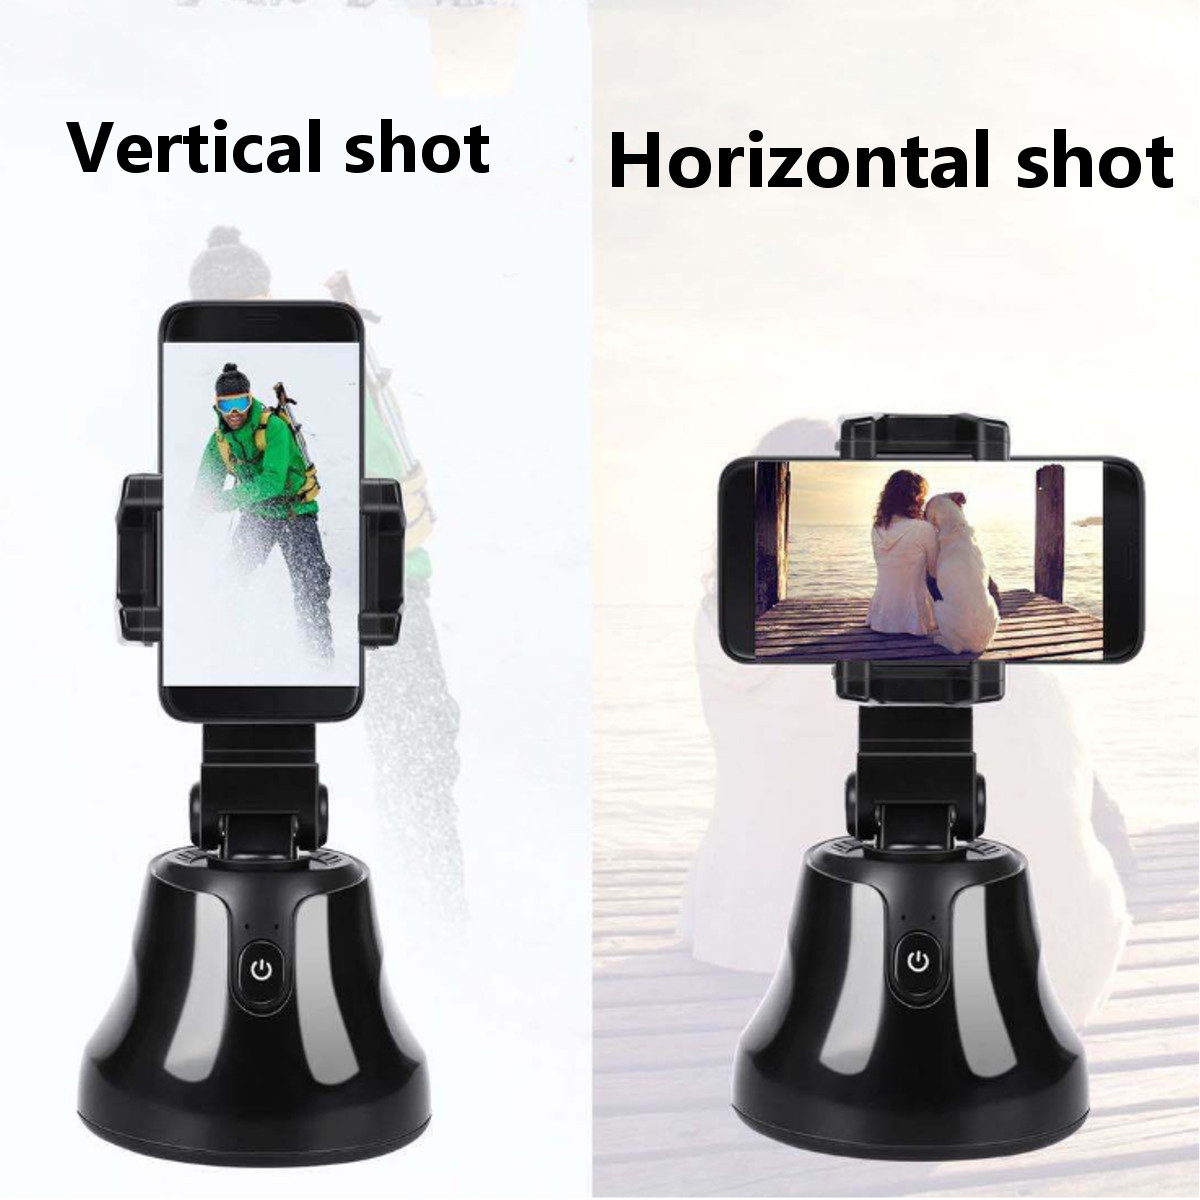 Smart-Shooting-Camera-Phone-Holder-Auto-Face-Tracking-Intelligent-Gimbal-Object-Tracking-Selfie-Stic-1674778-4